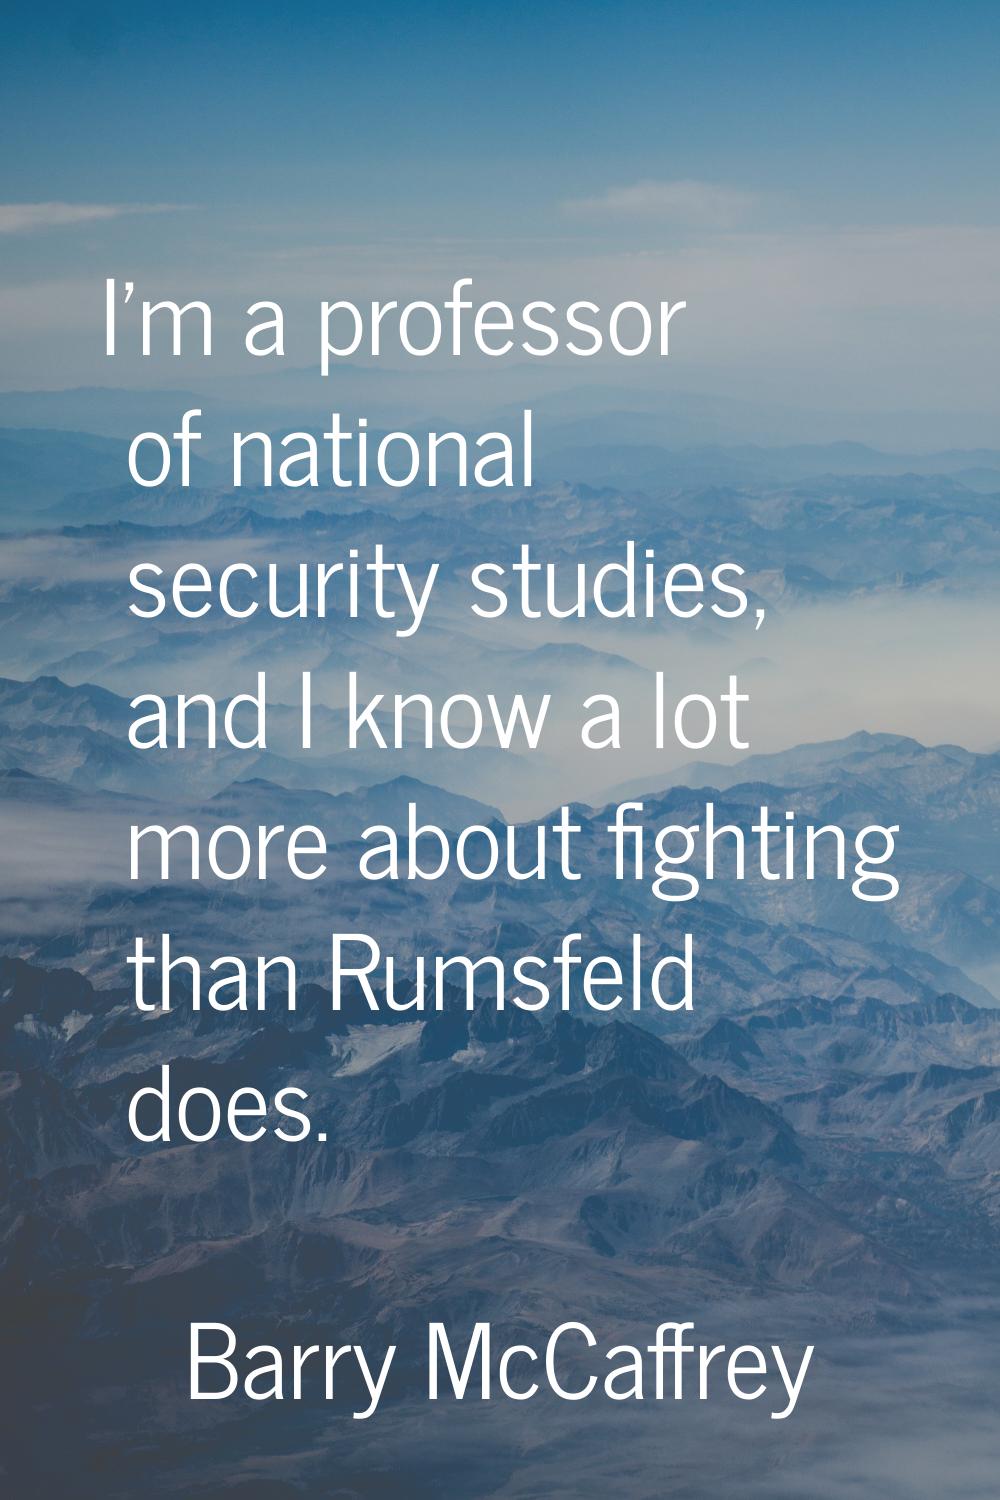 I'm a professor of national security studies, and I know a lot more about fighting than Rumsfeld do